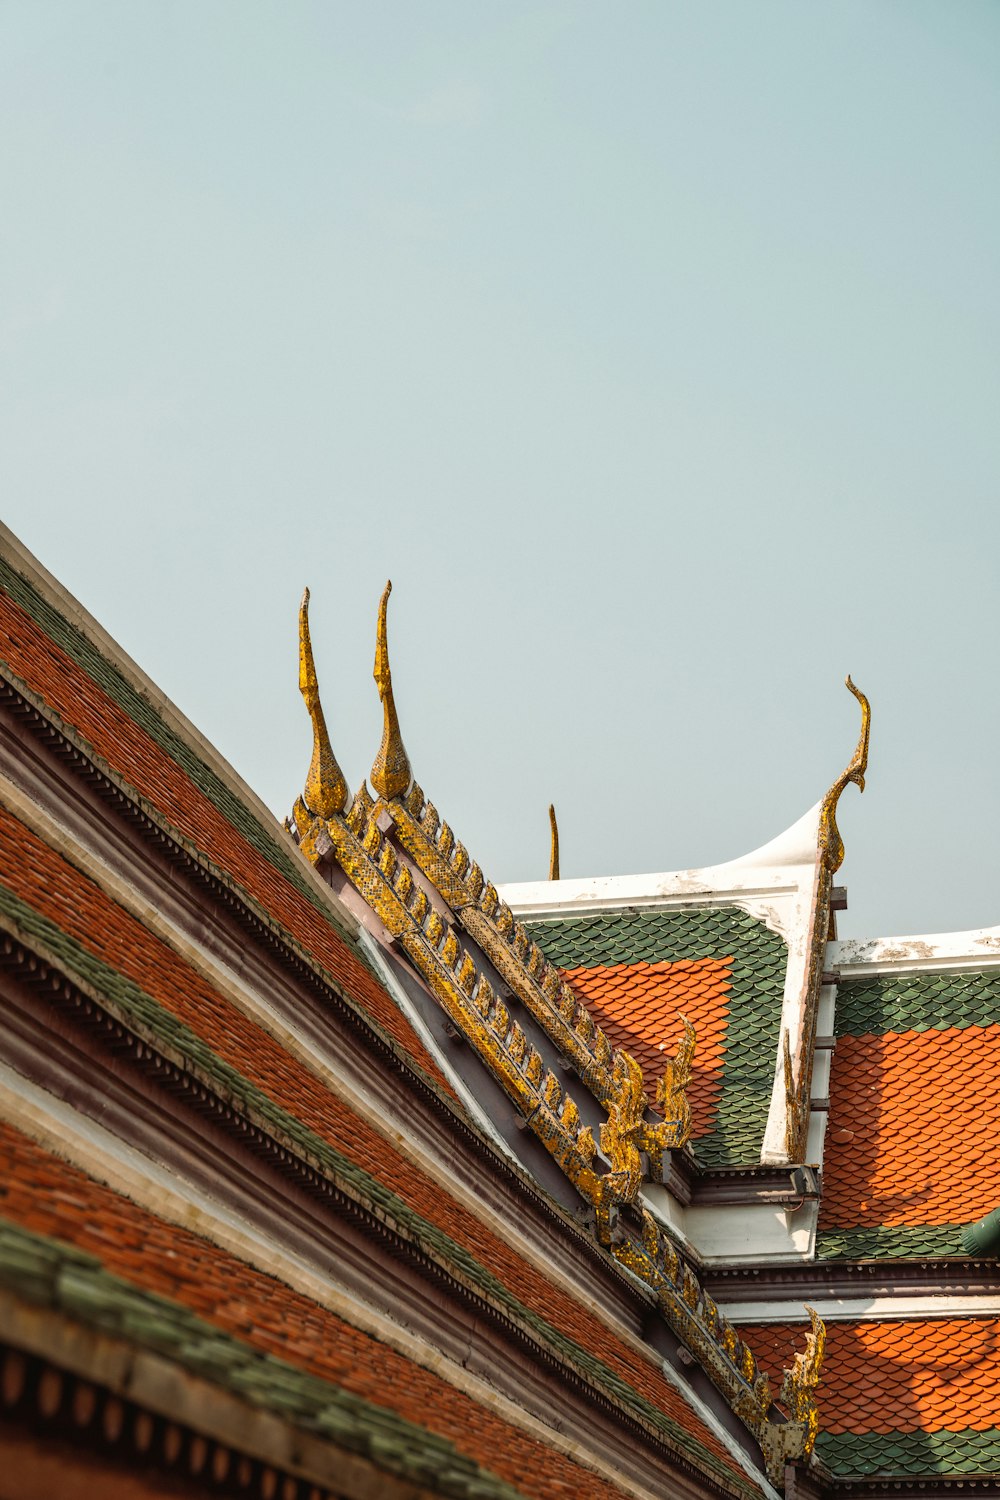 the roof of a building with golden gargoyles on it